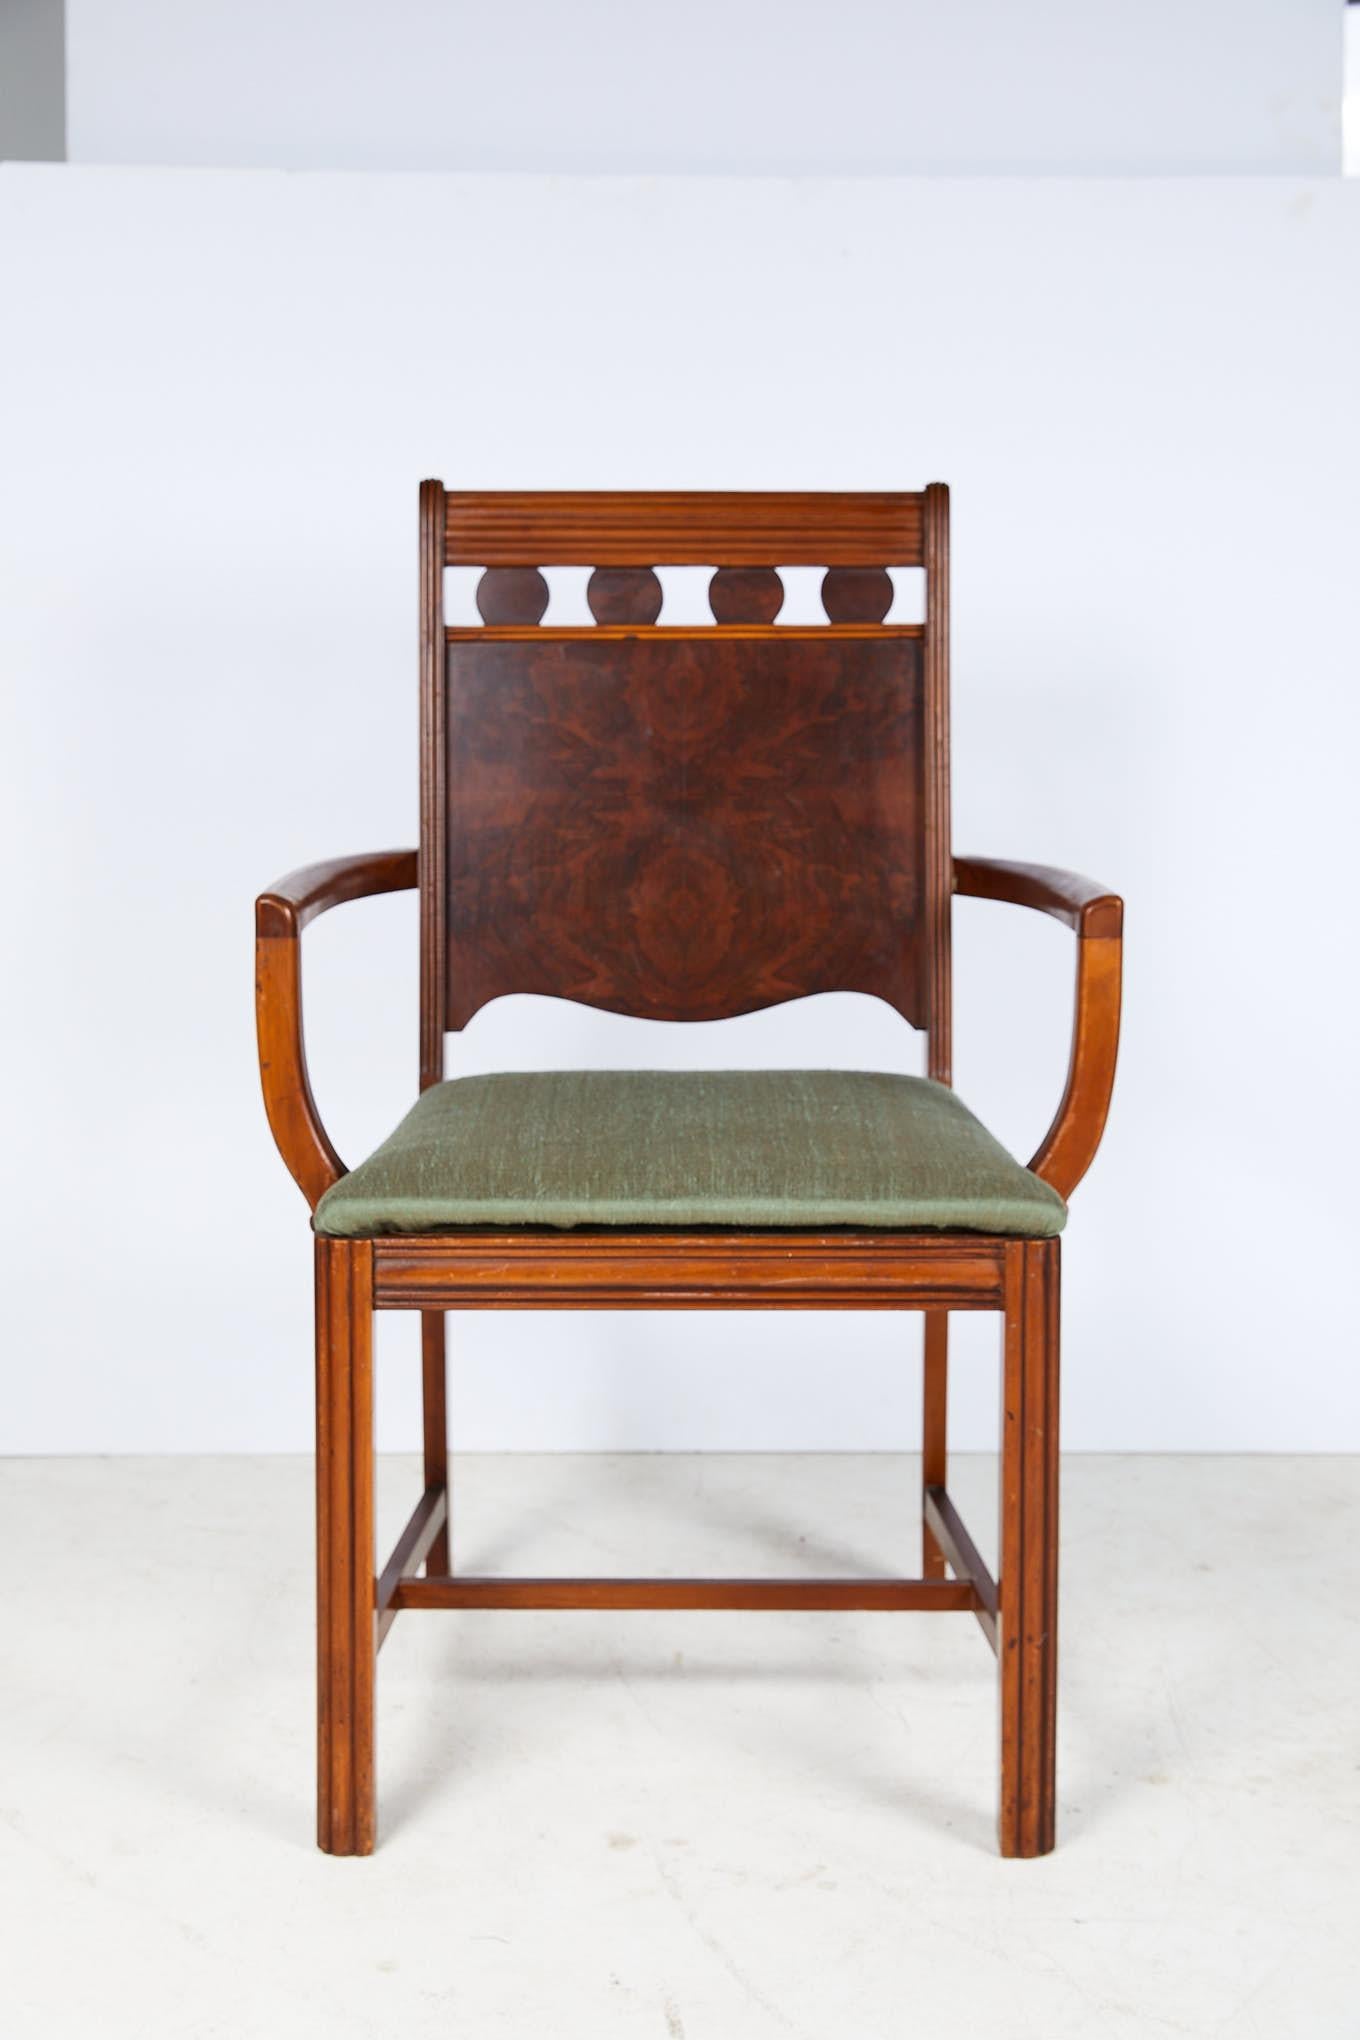 Early 20th century Art Deco period side chair with a reeded top chair rail and uprights framing four burl walnut veneered discs over an inset burl walnut back panel having a serpentine bottom edge. Bowed arms gracefully terminate into an upholstered